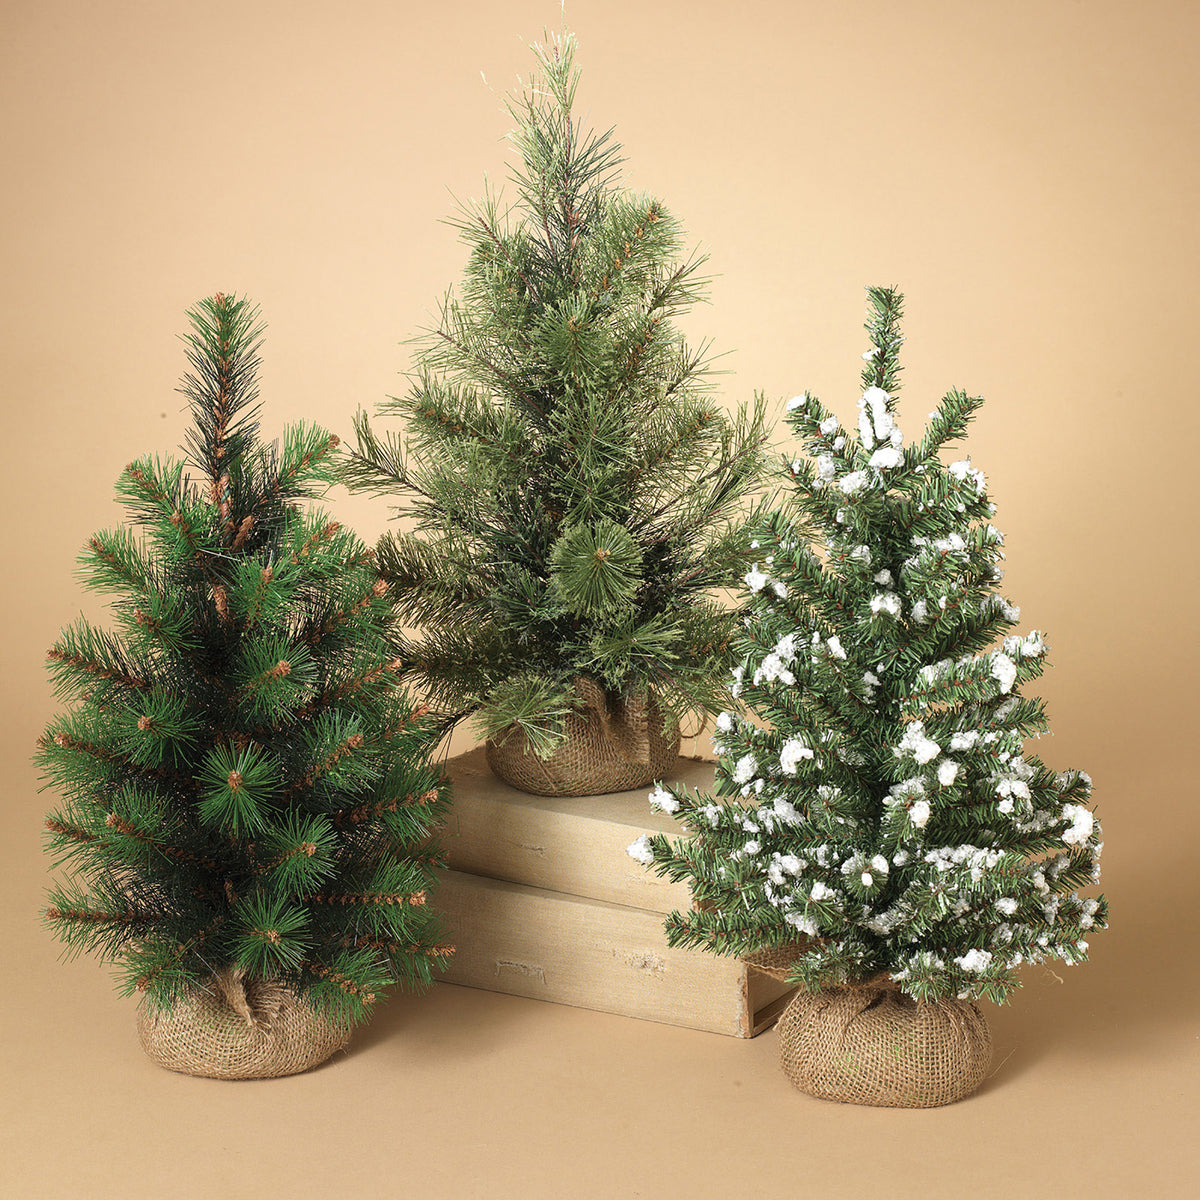 12"H Assorted Pine Trees